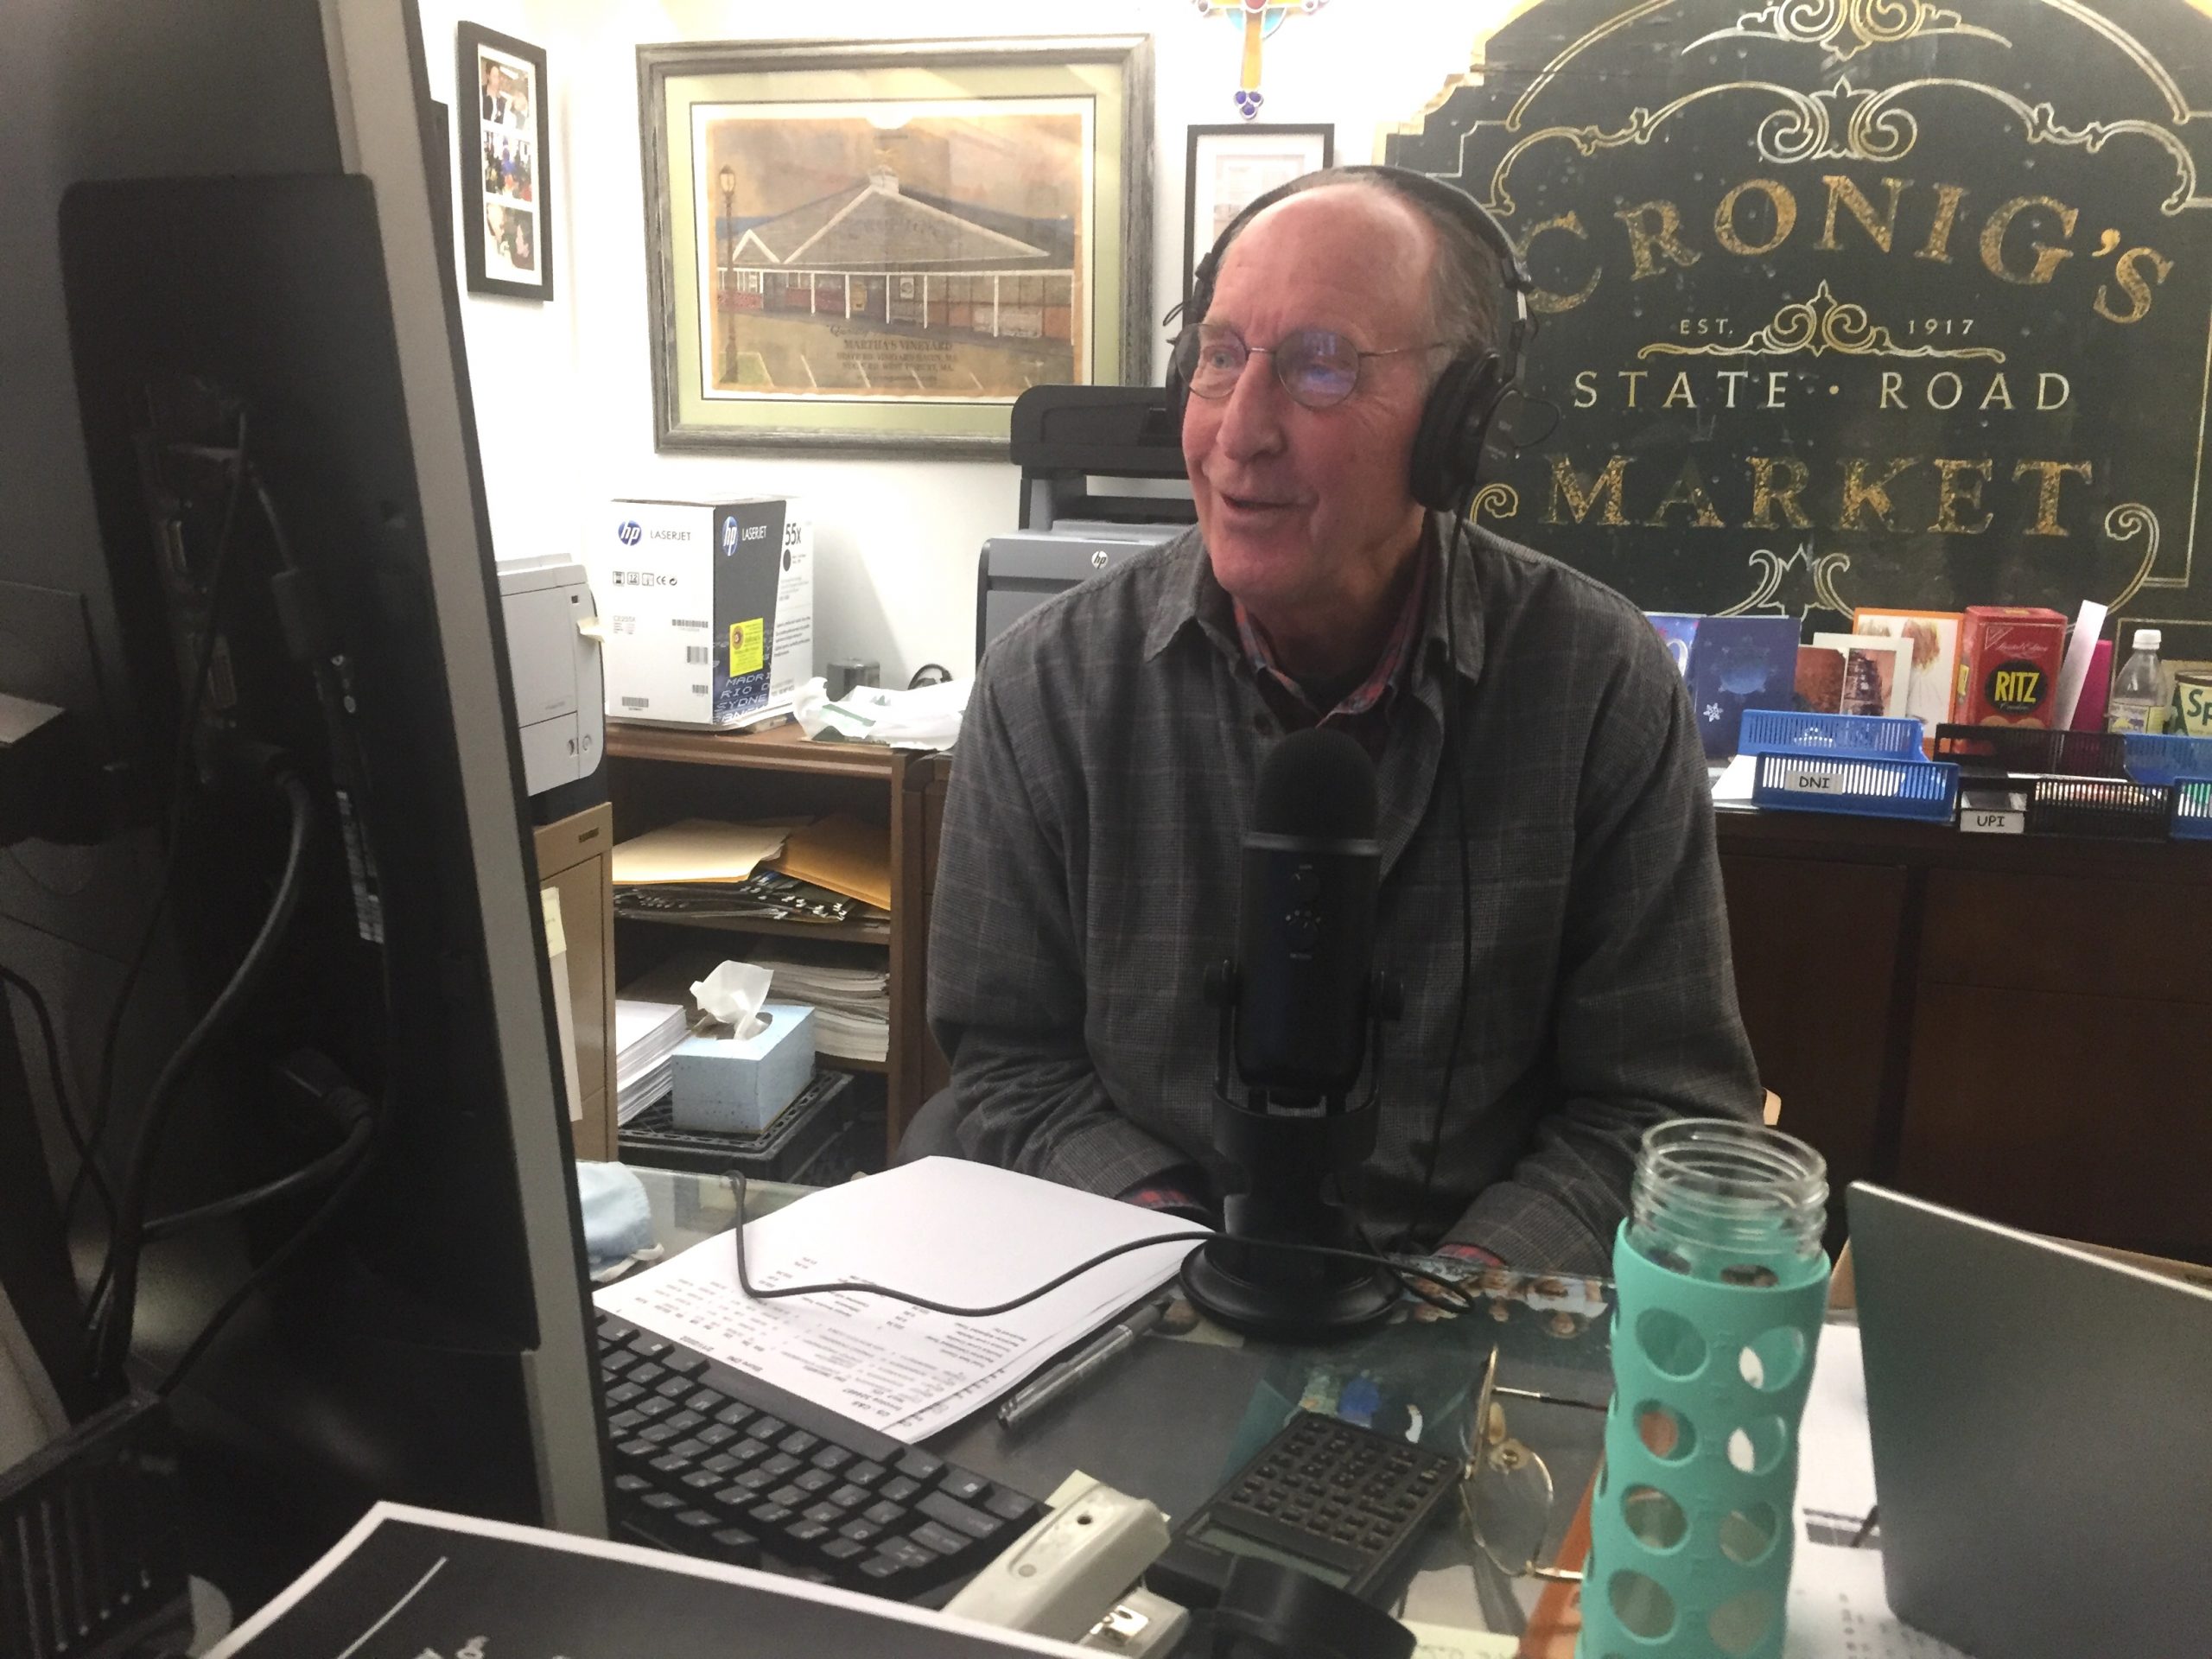 Steve Bernier, owner of Cronig’s Market on Martha’s Vineyard, USA, speaks in his office to Chris Henderson of Mylor Stores, in Falmouth, UK, about managing their community grocery stores through the early days of the pandemic.